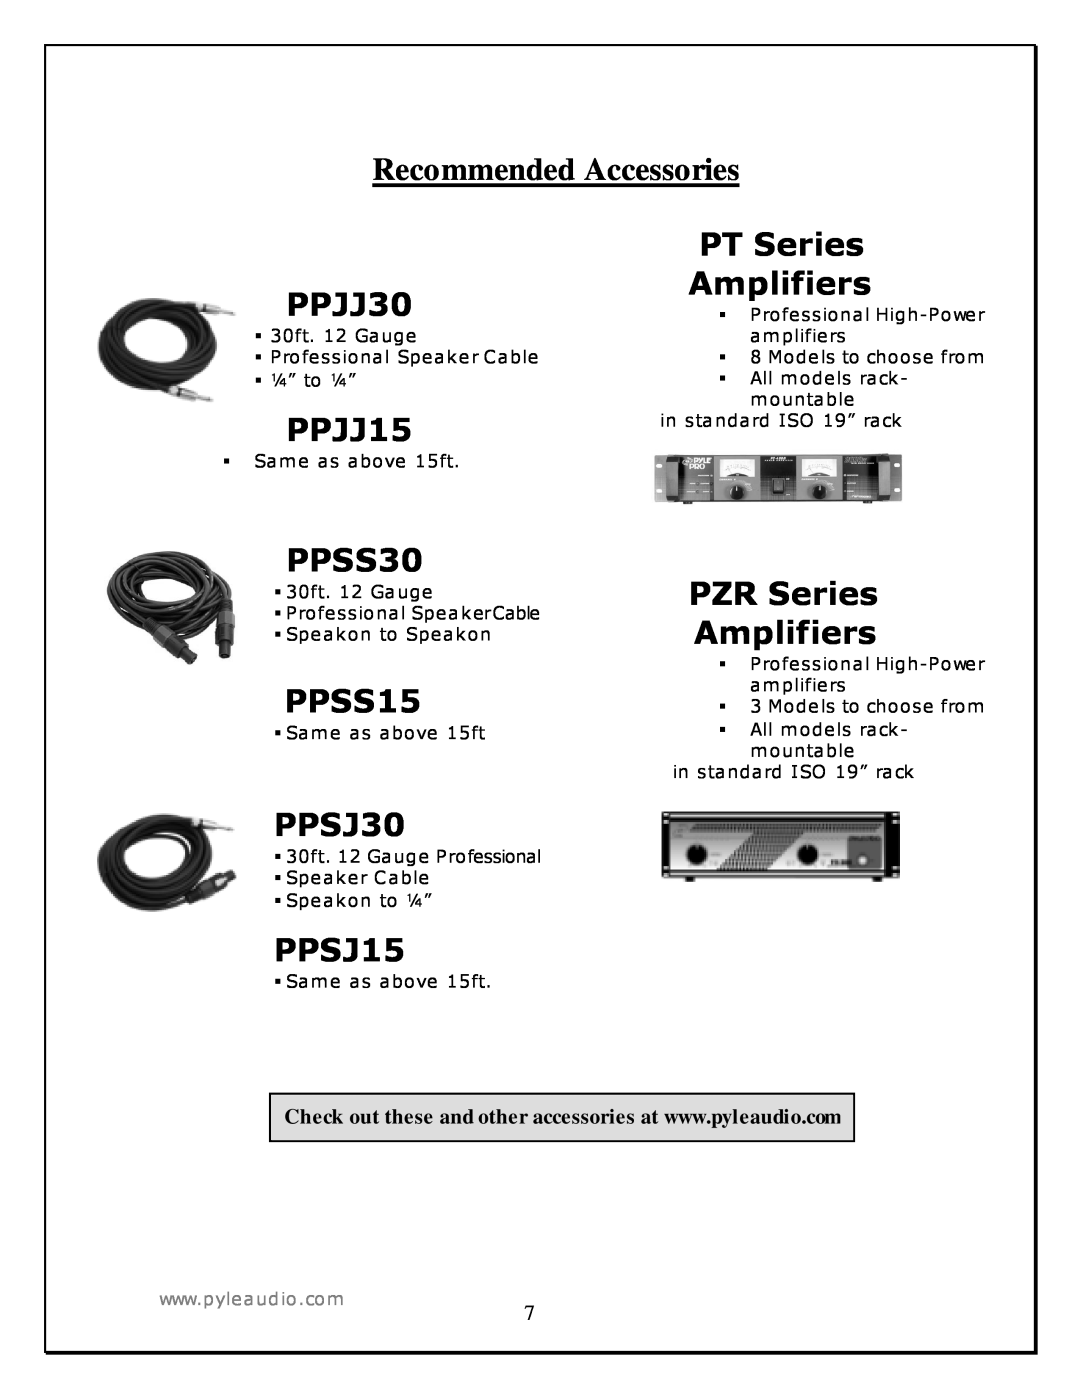 Radio Shack PASC12 manual Recommended Accessories 